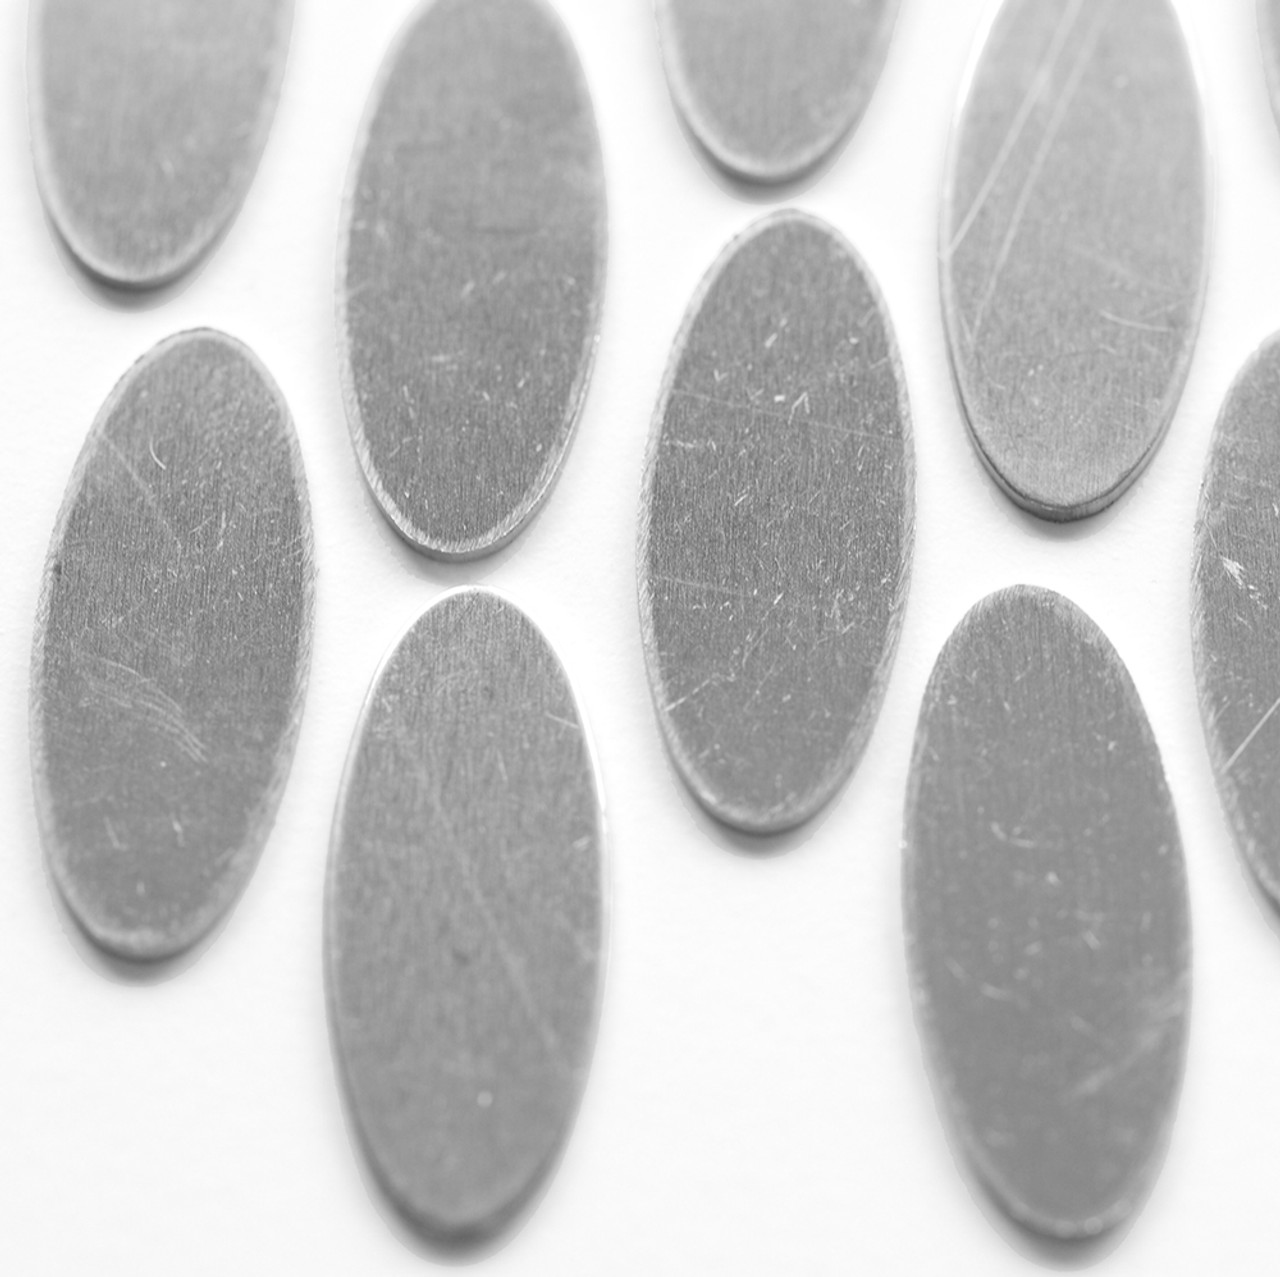 Aluminium oval tag for jewellery and other crafts